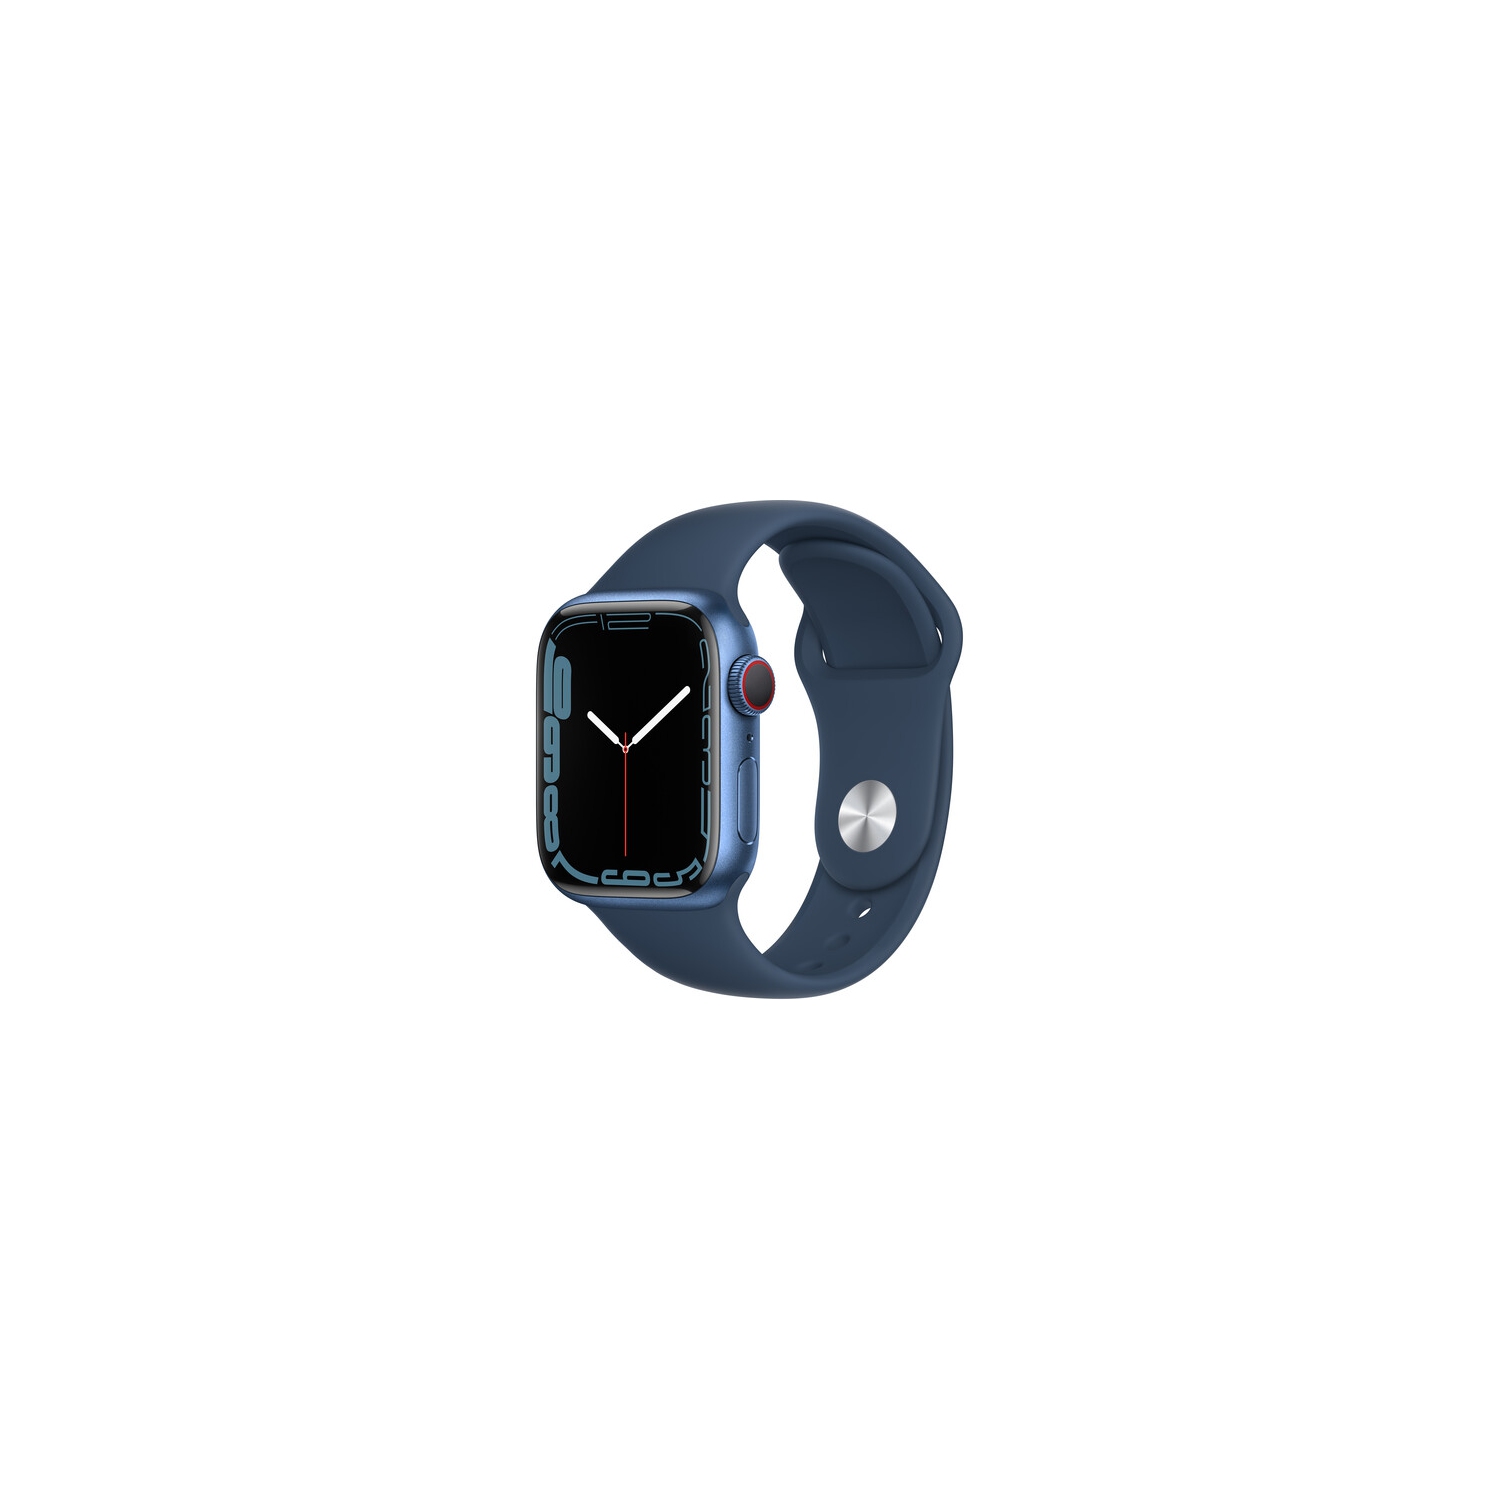 Apple Watch Series 7 GPS + Cellular, 41mm Blue Aluminum Case with 